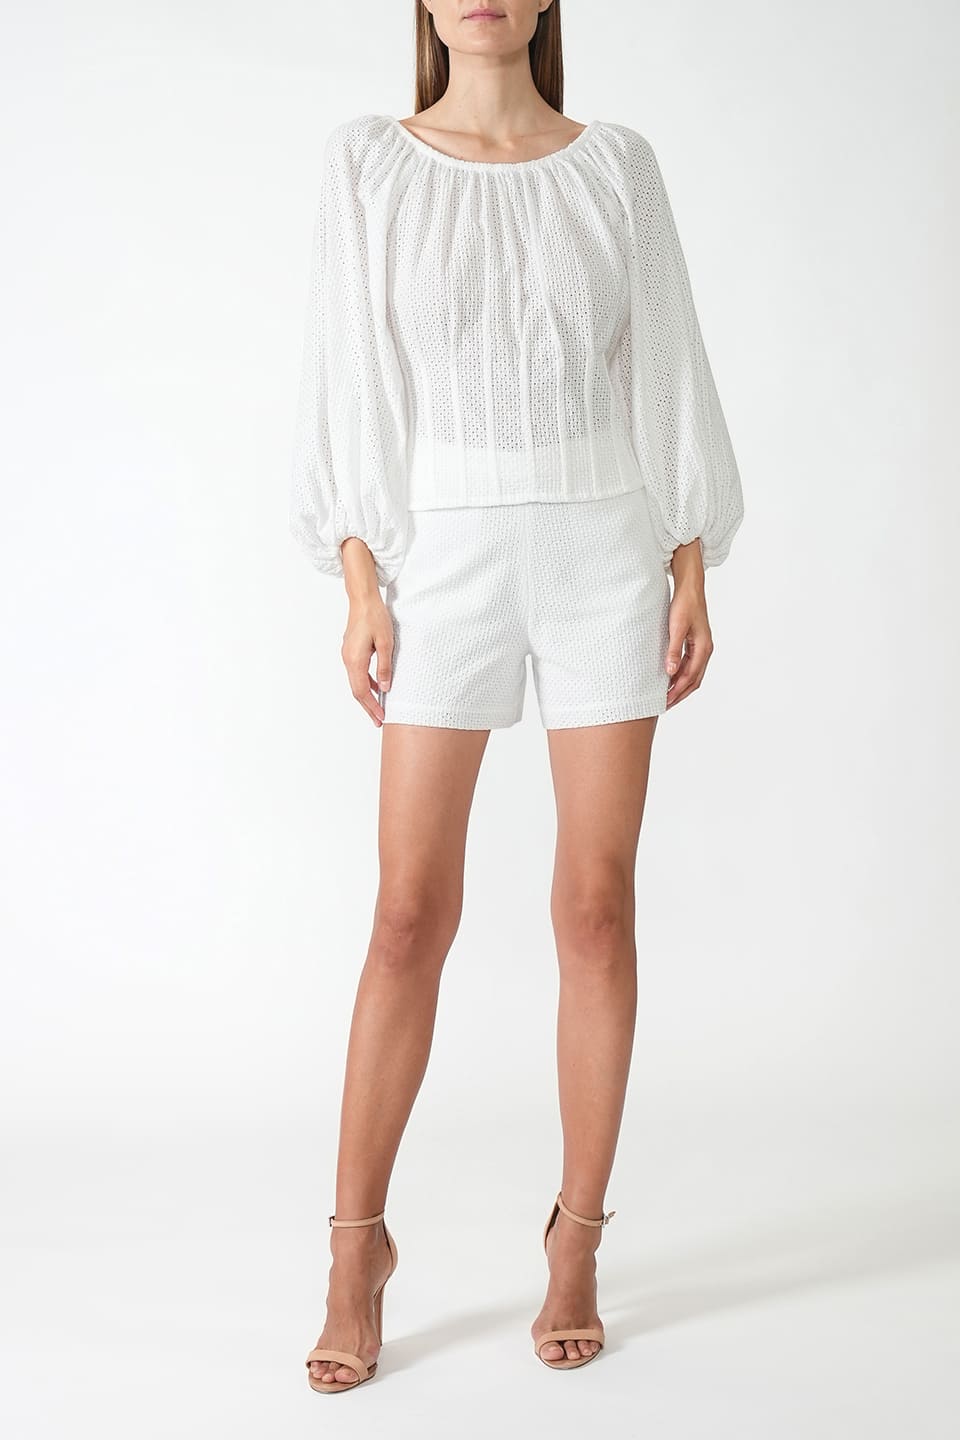 Shop online trendy White Women blouses from Federica Tosi Fashion designer. Product gallery 1